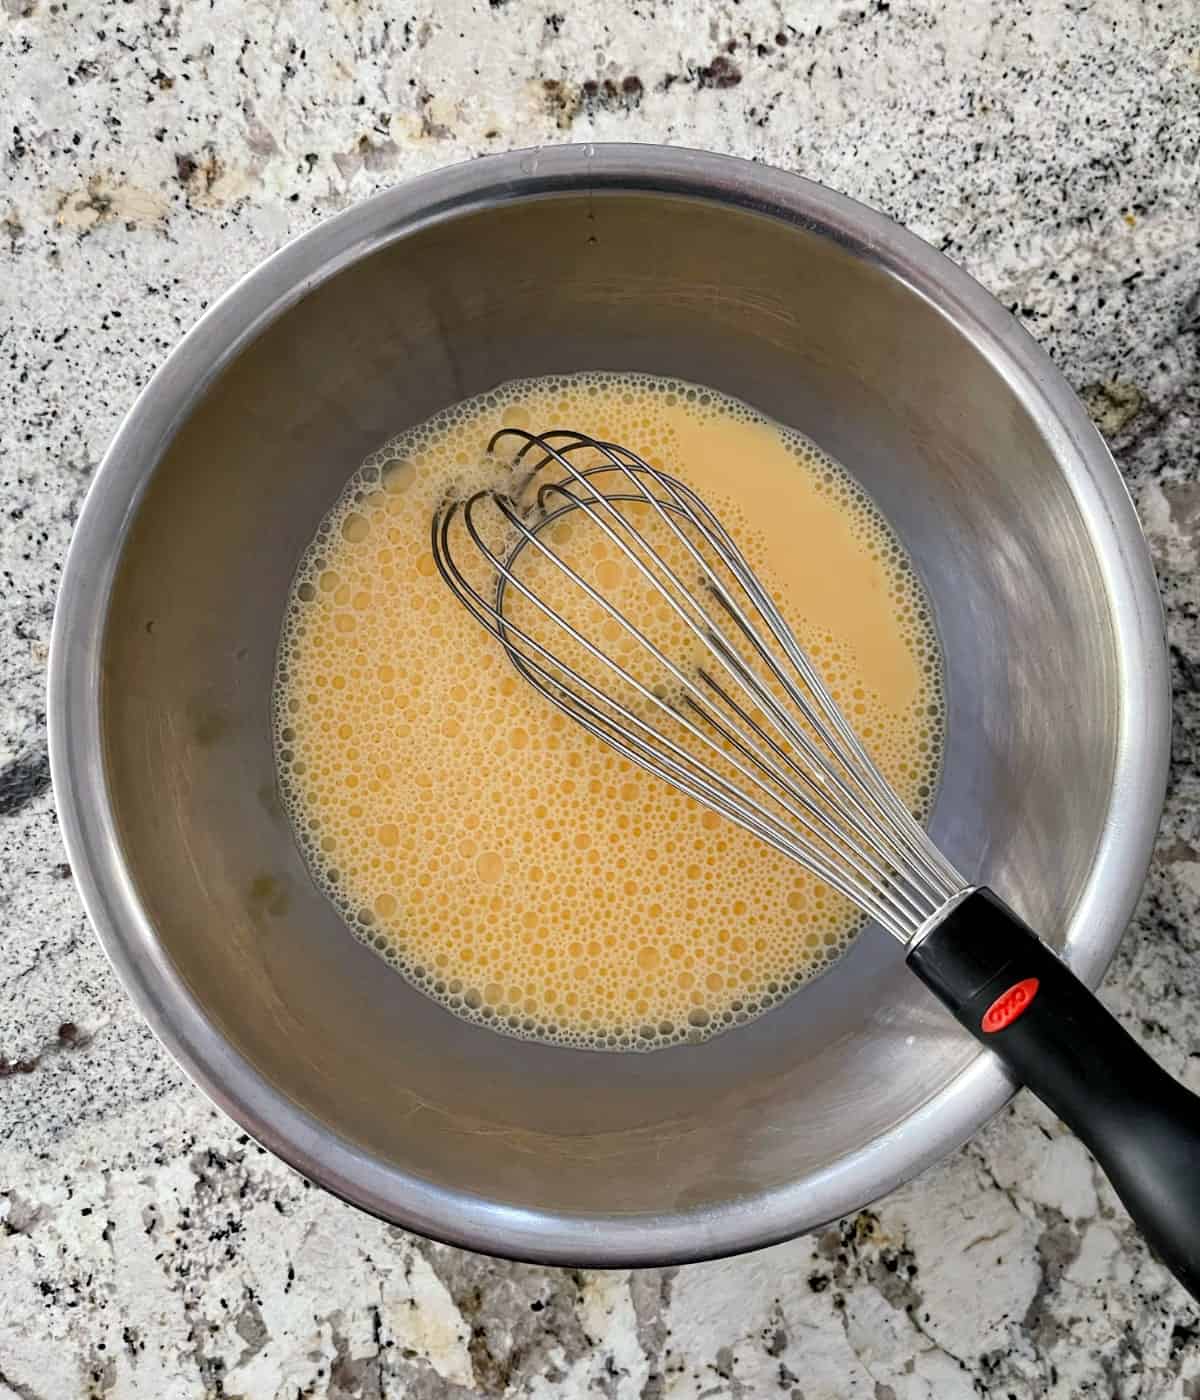 Whisking egg yolks and milk in stainless mixing bowl.